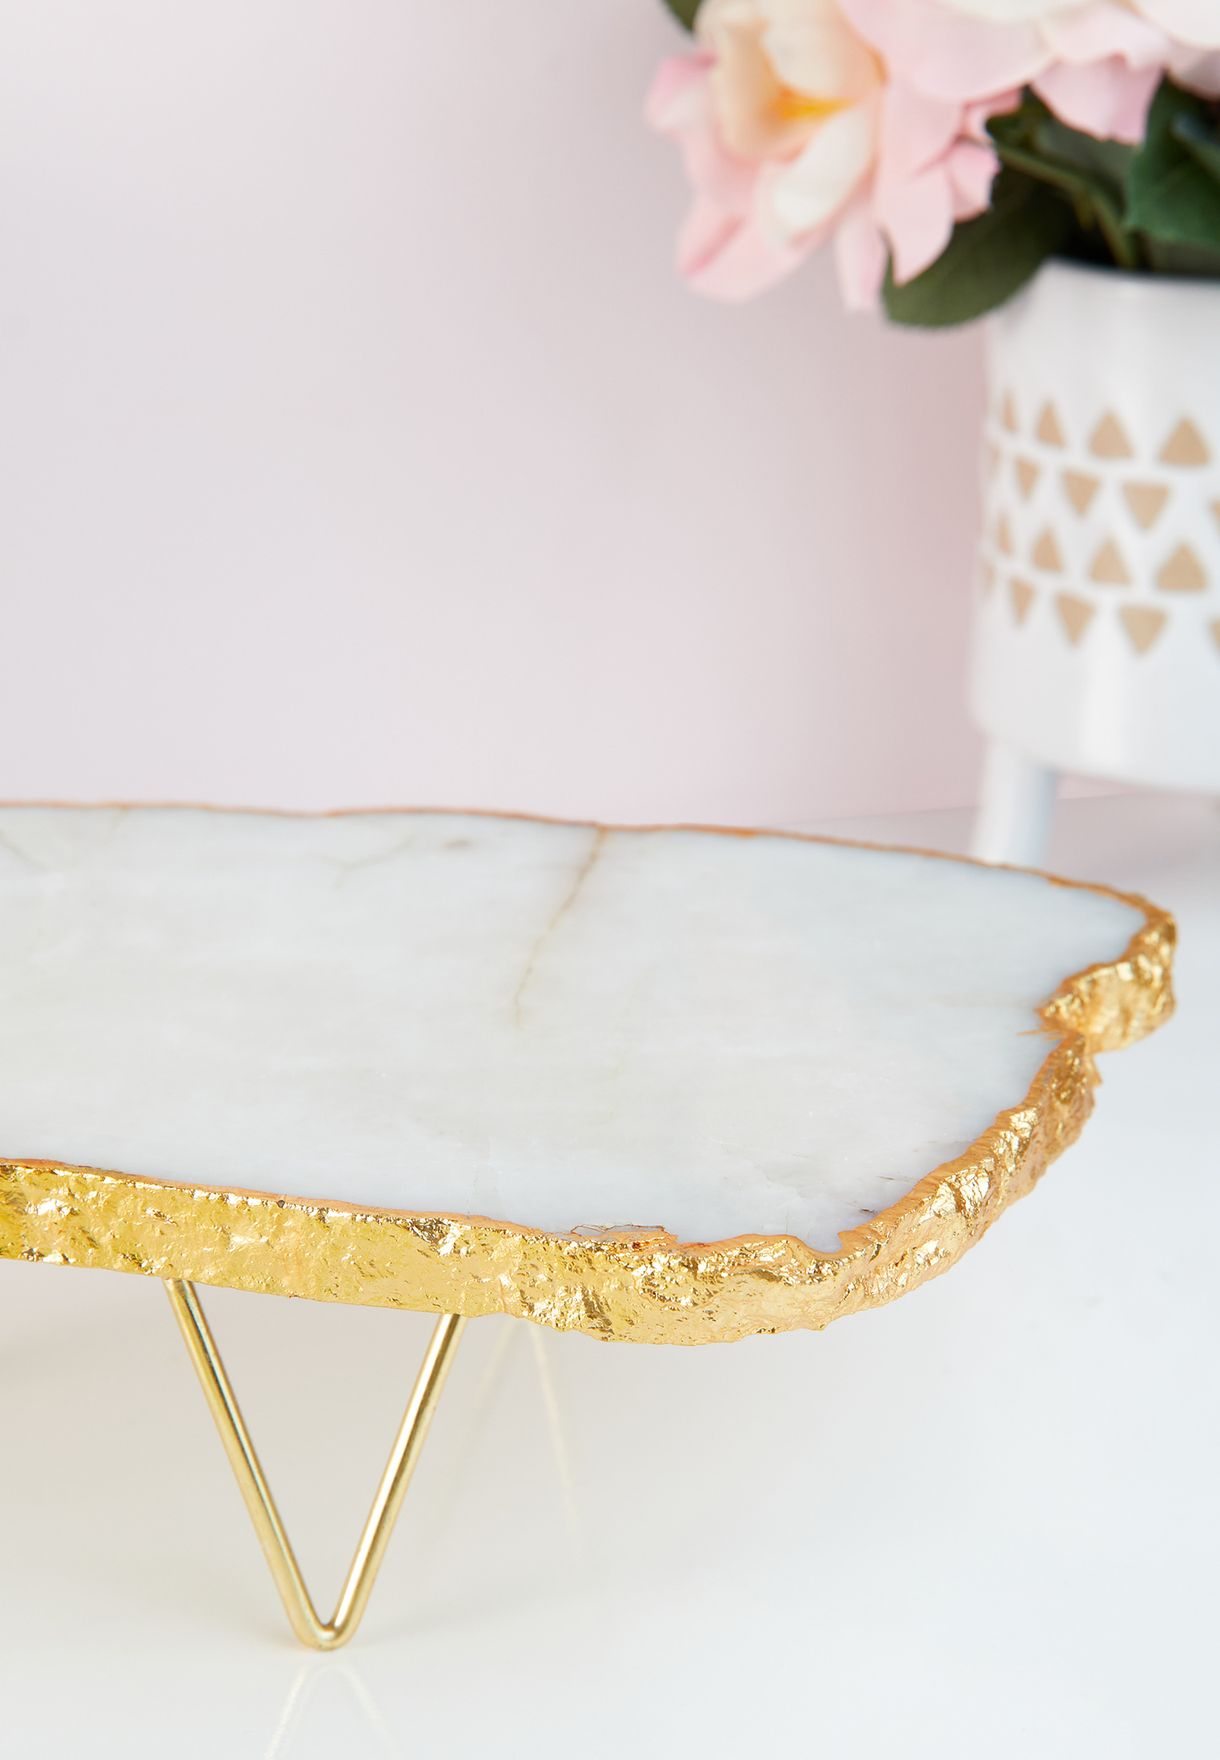 White Quartz Cake Stand With Gold Detailing